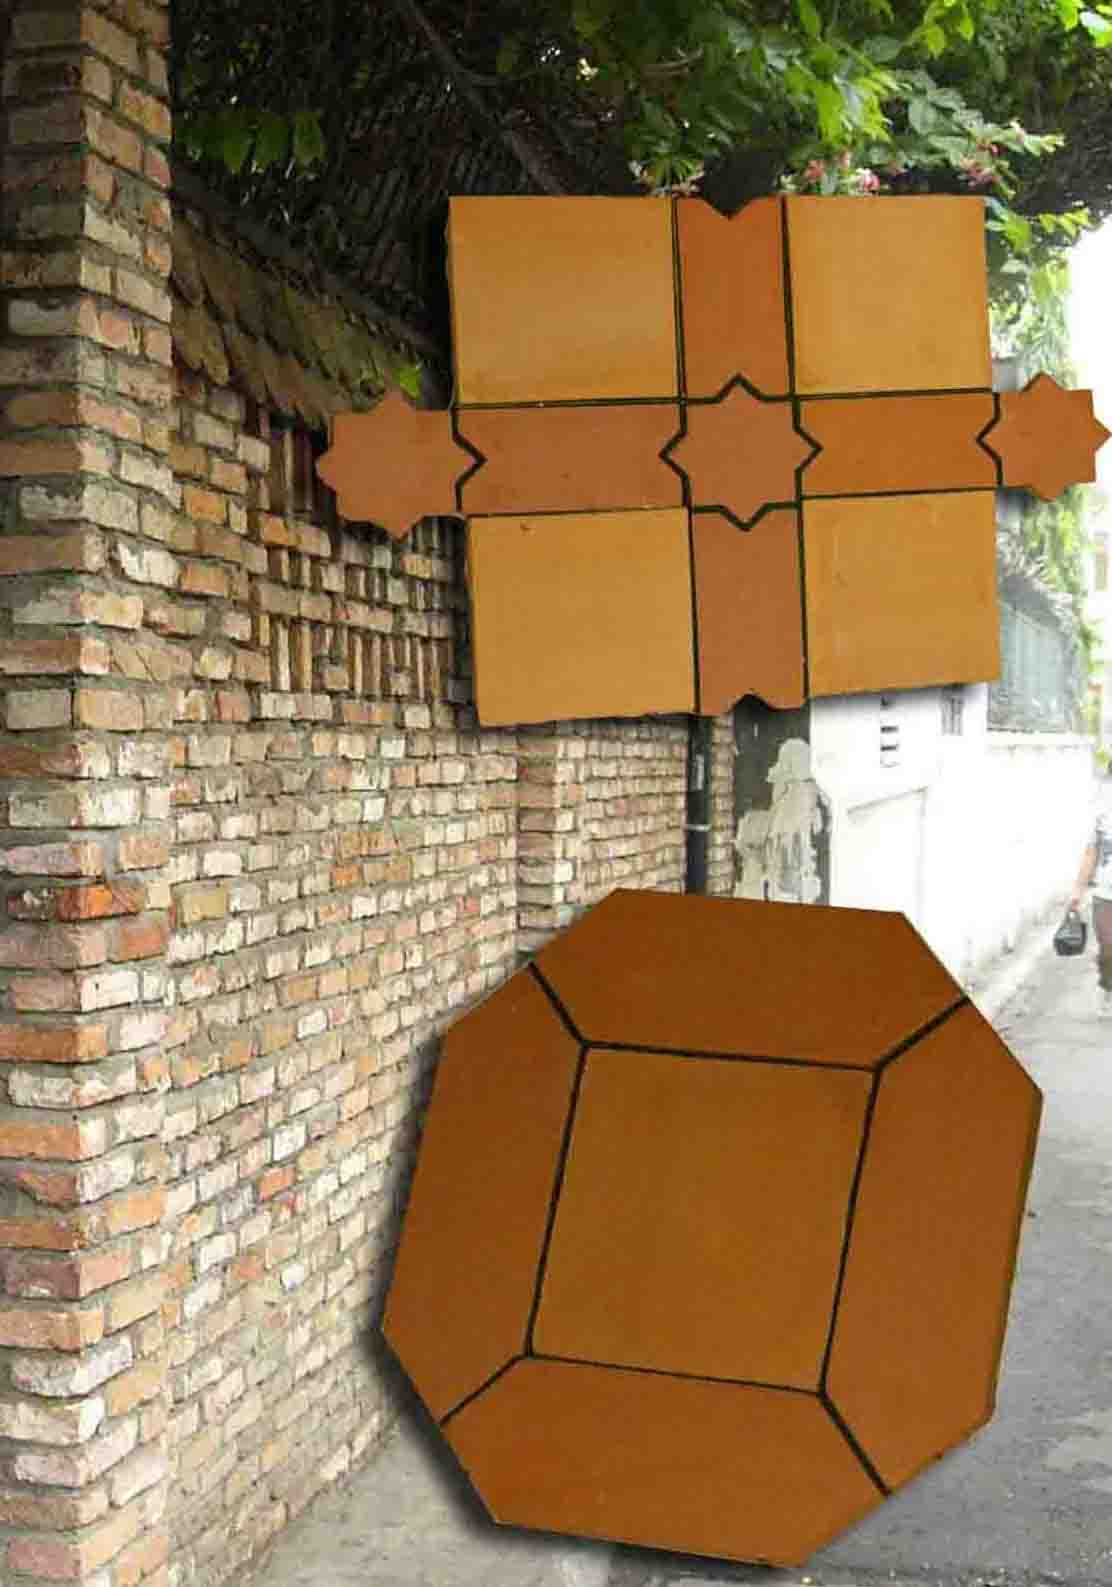  Terracotta Deco Clay Block And Tiles (Terracotta Deco Clay Block and Tiles)